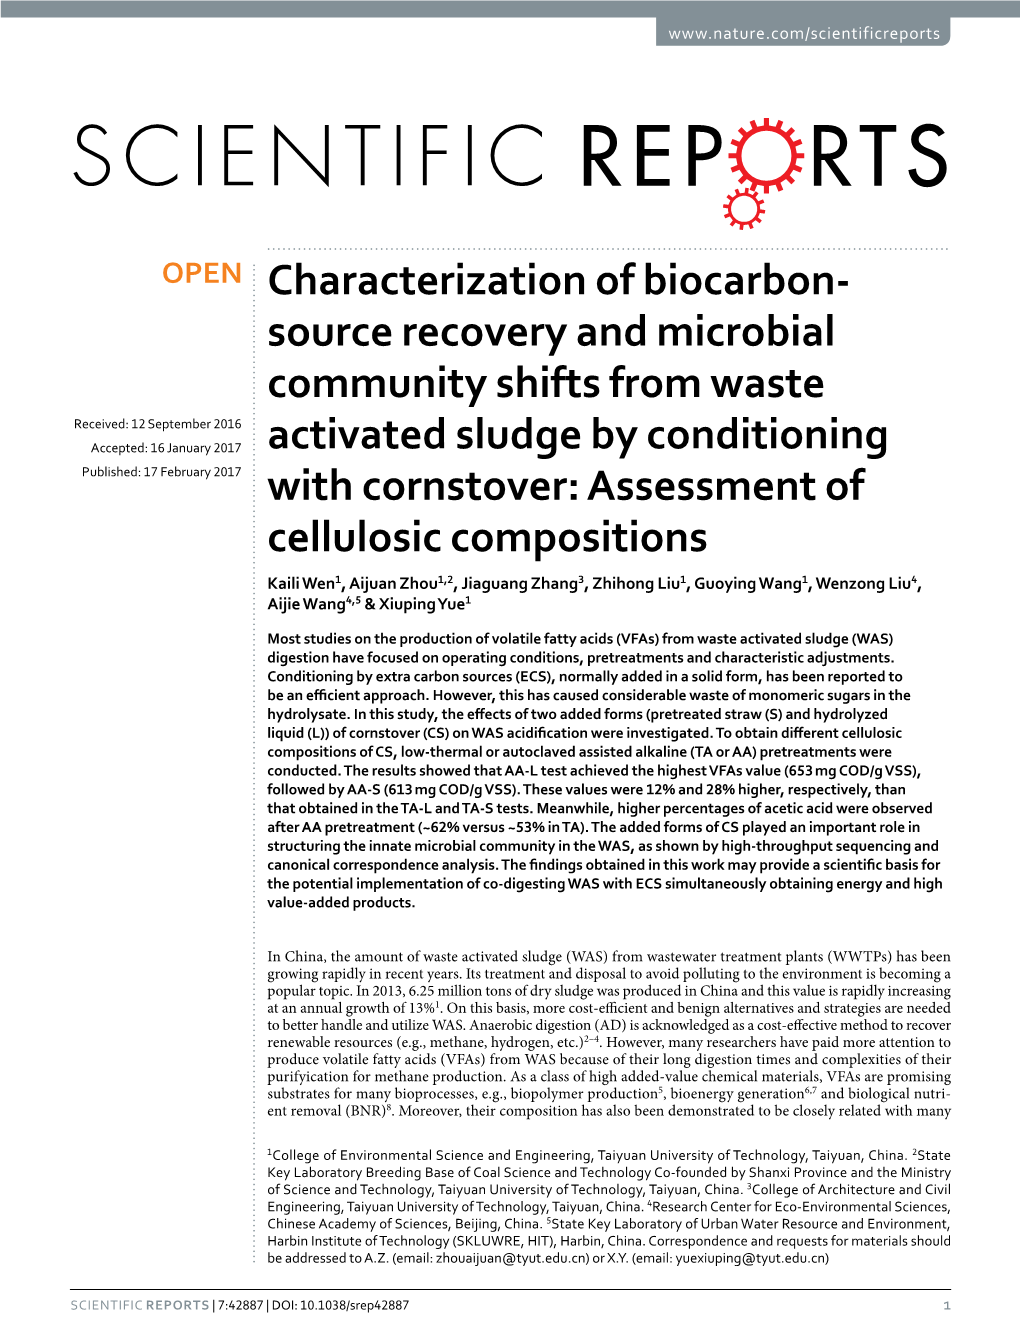 Characterization of Biocarbon-Source Recovery and Microbial Community Shifts from Waste Activated Sludge by Conditioning with Co